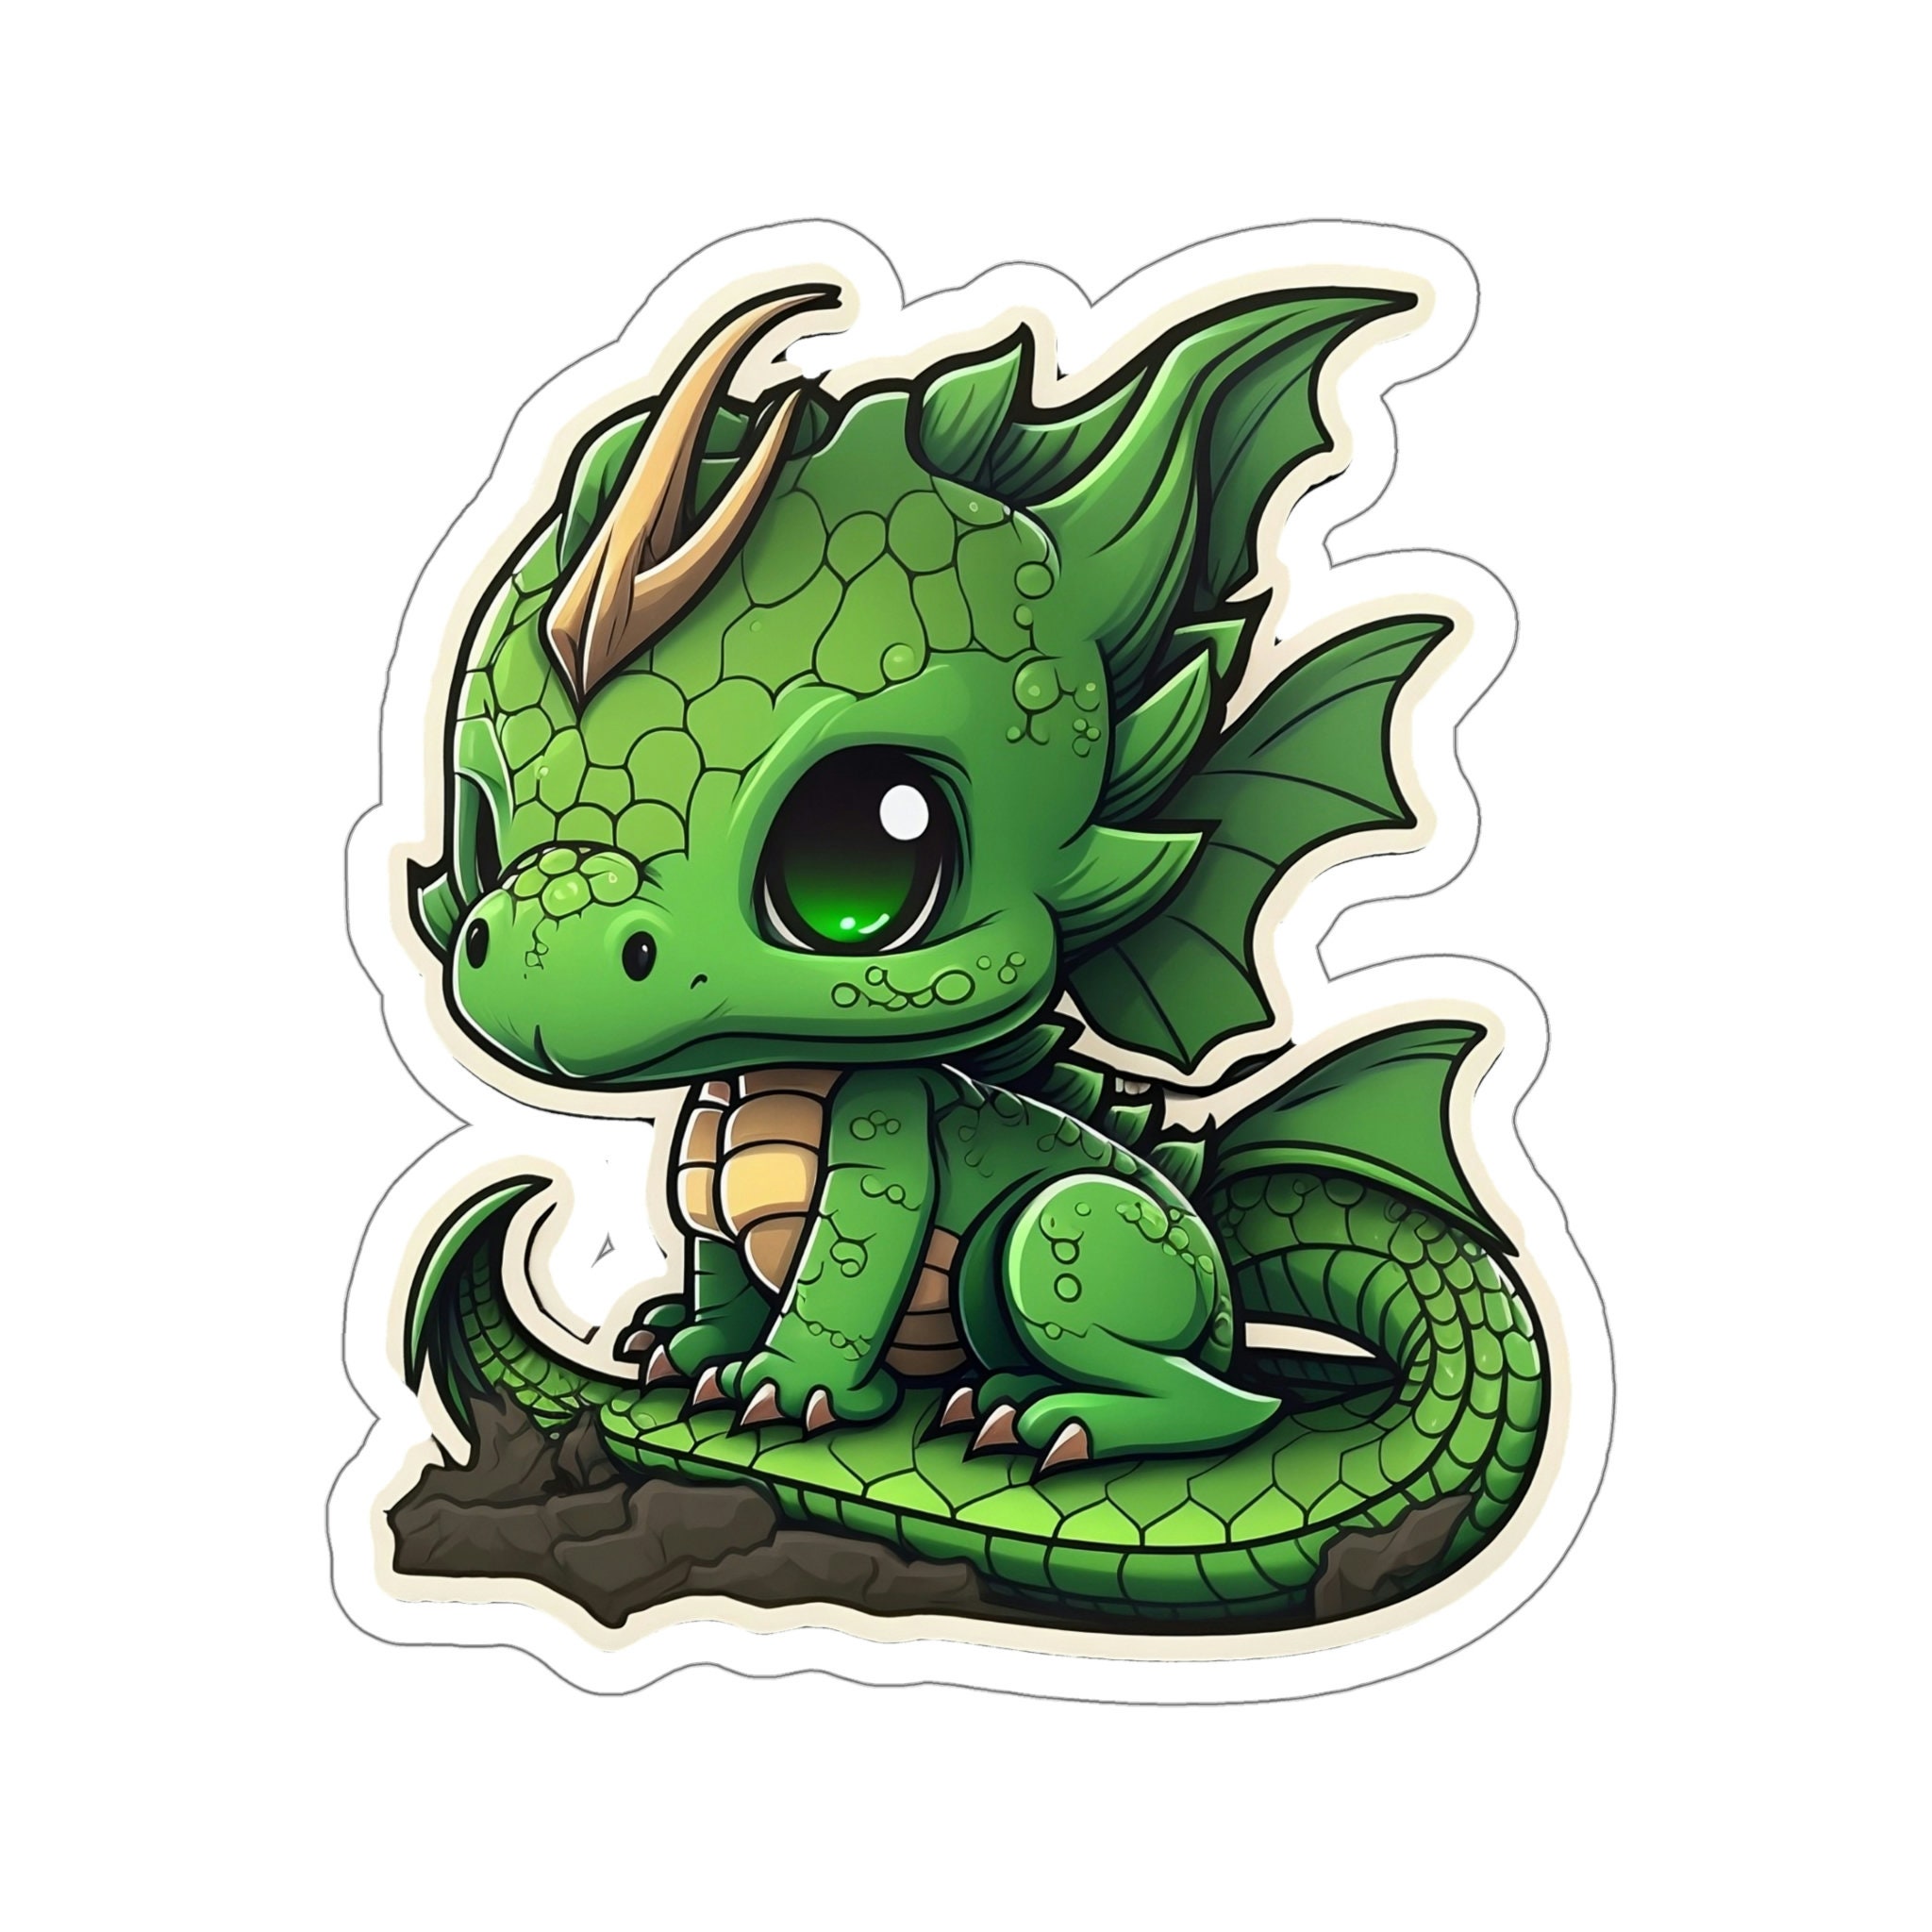 Black Dragon Chibi Kiss-cut Stickers, Fantasy Stickers for Tabletop Gaming,  Roleplaying, Decorations, Scrapbooking and More. 